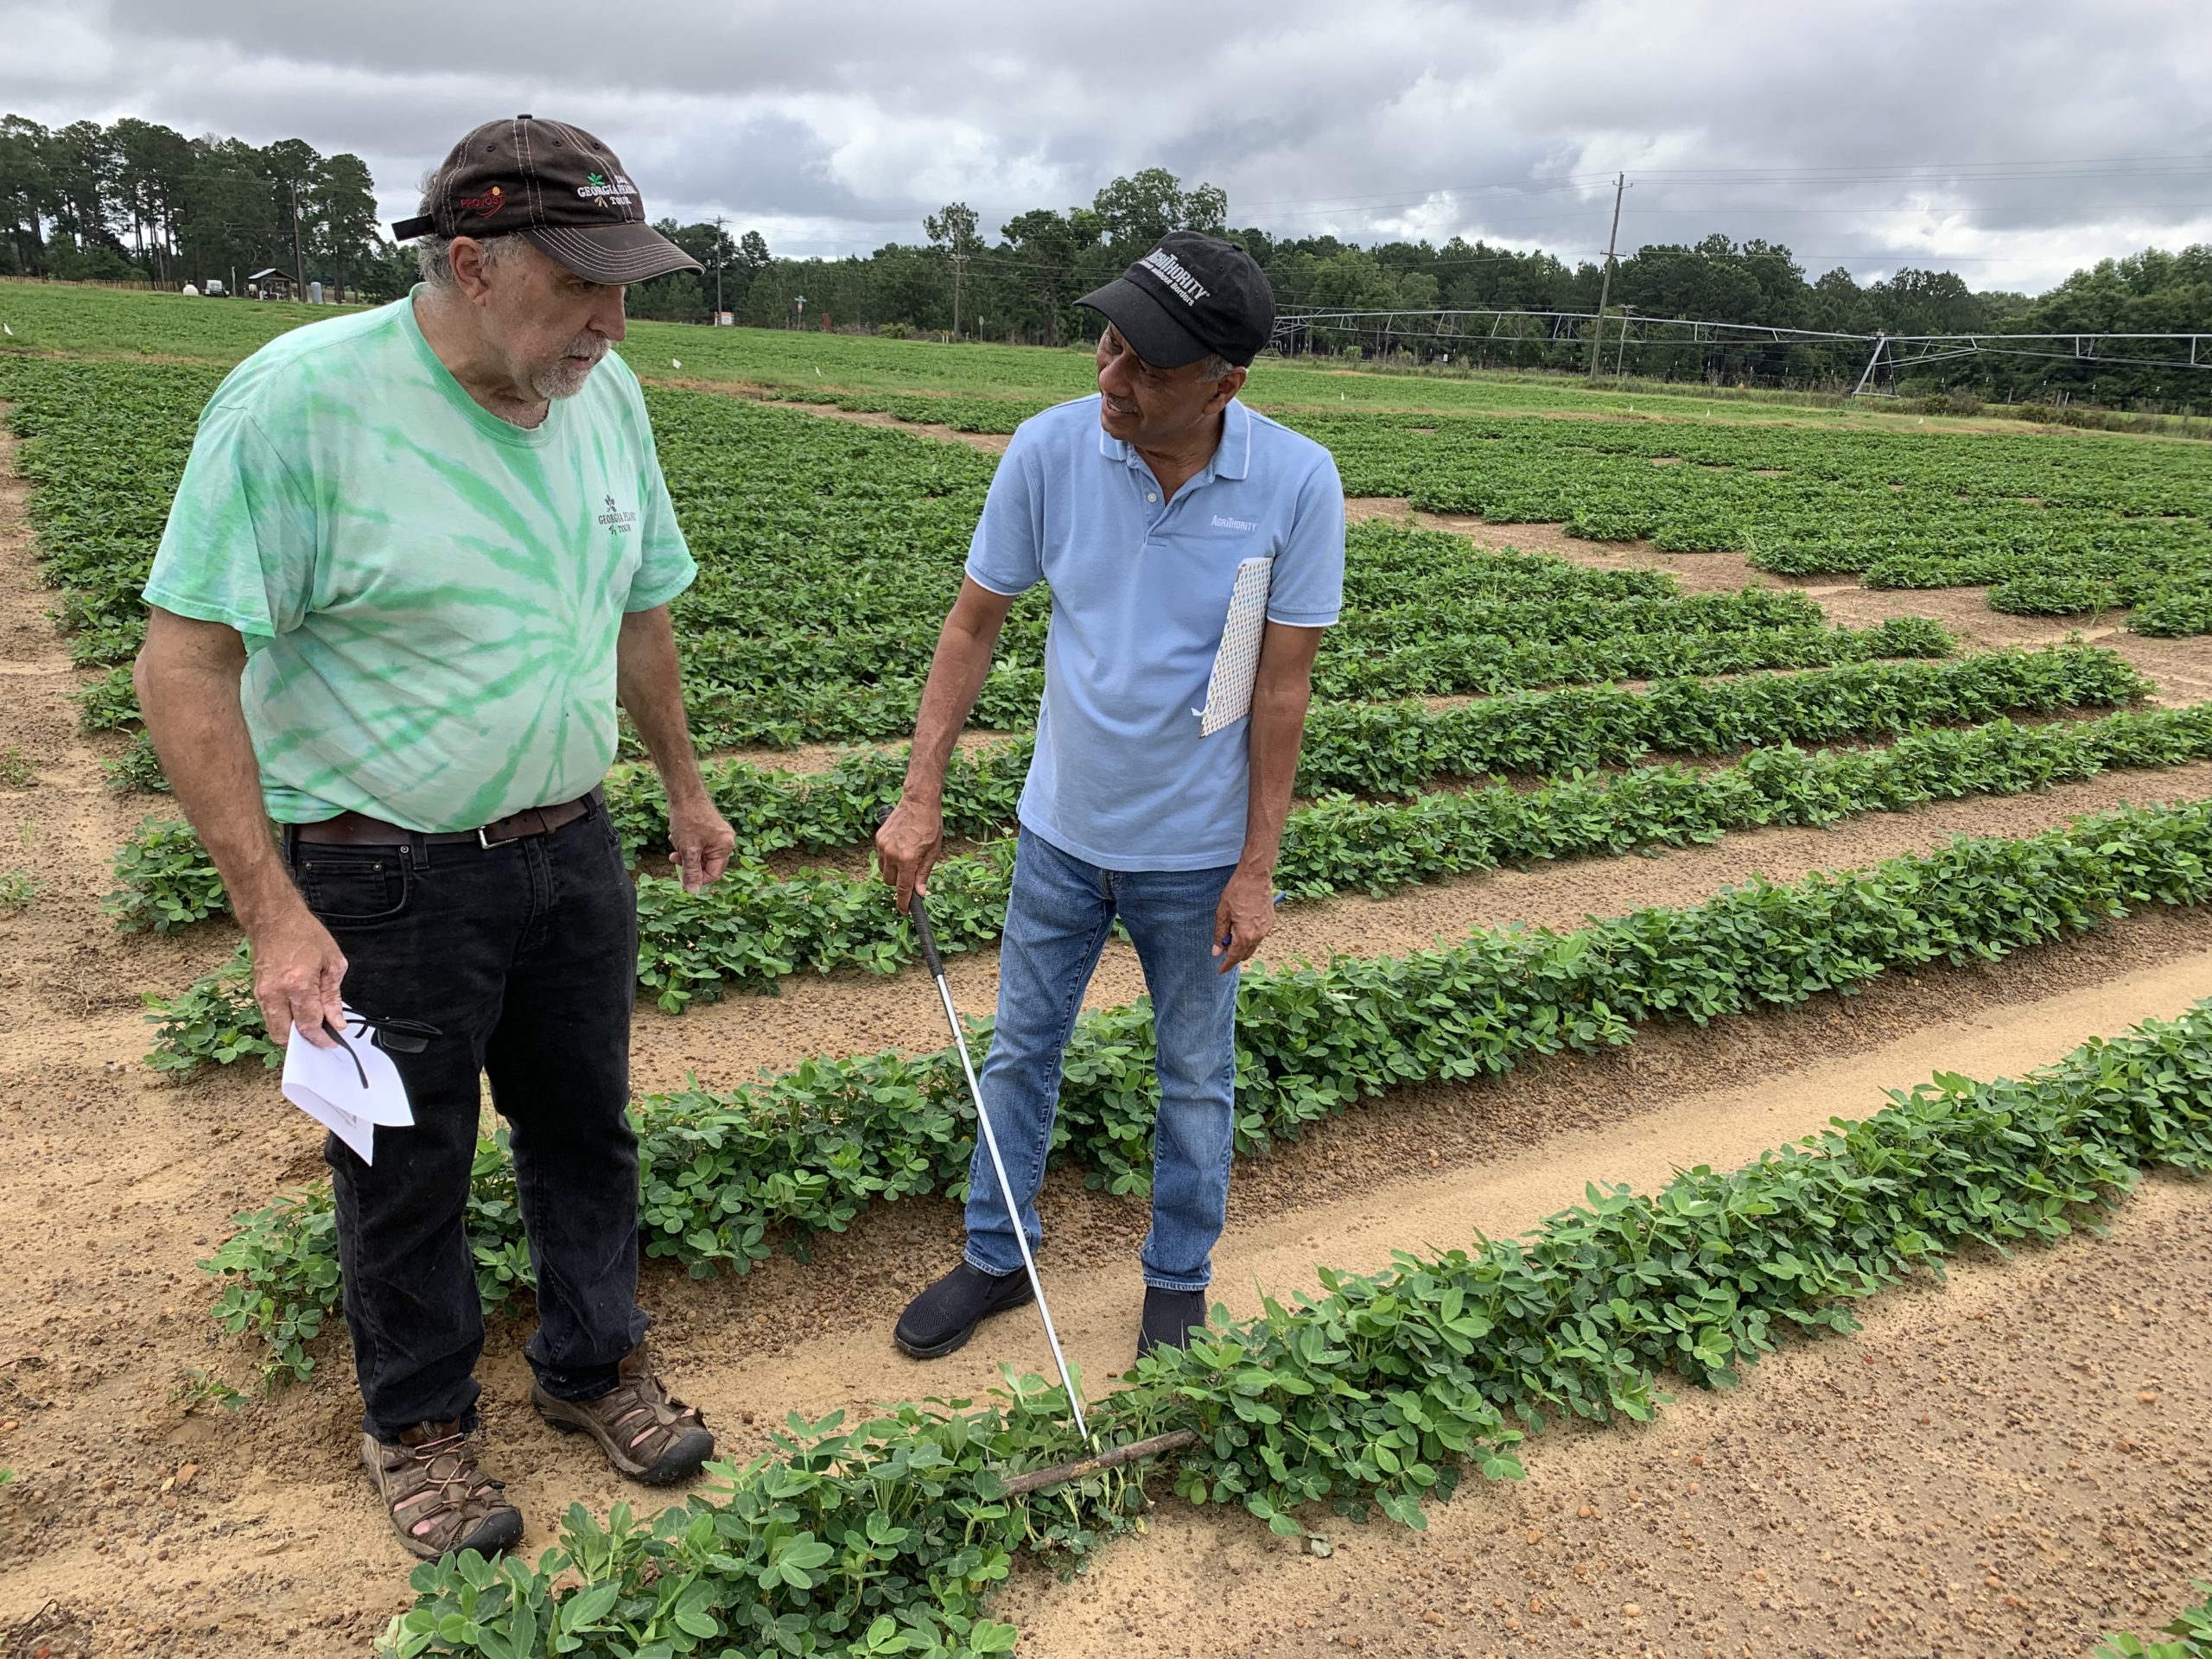 The peanut small-plot trials testing a biofungicide yielded good results.